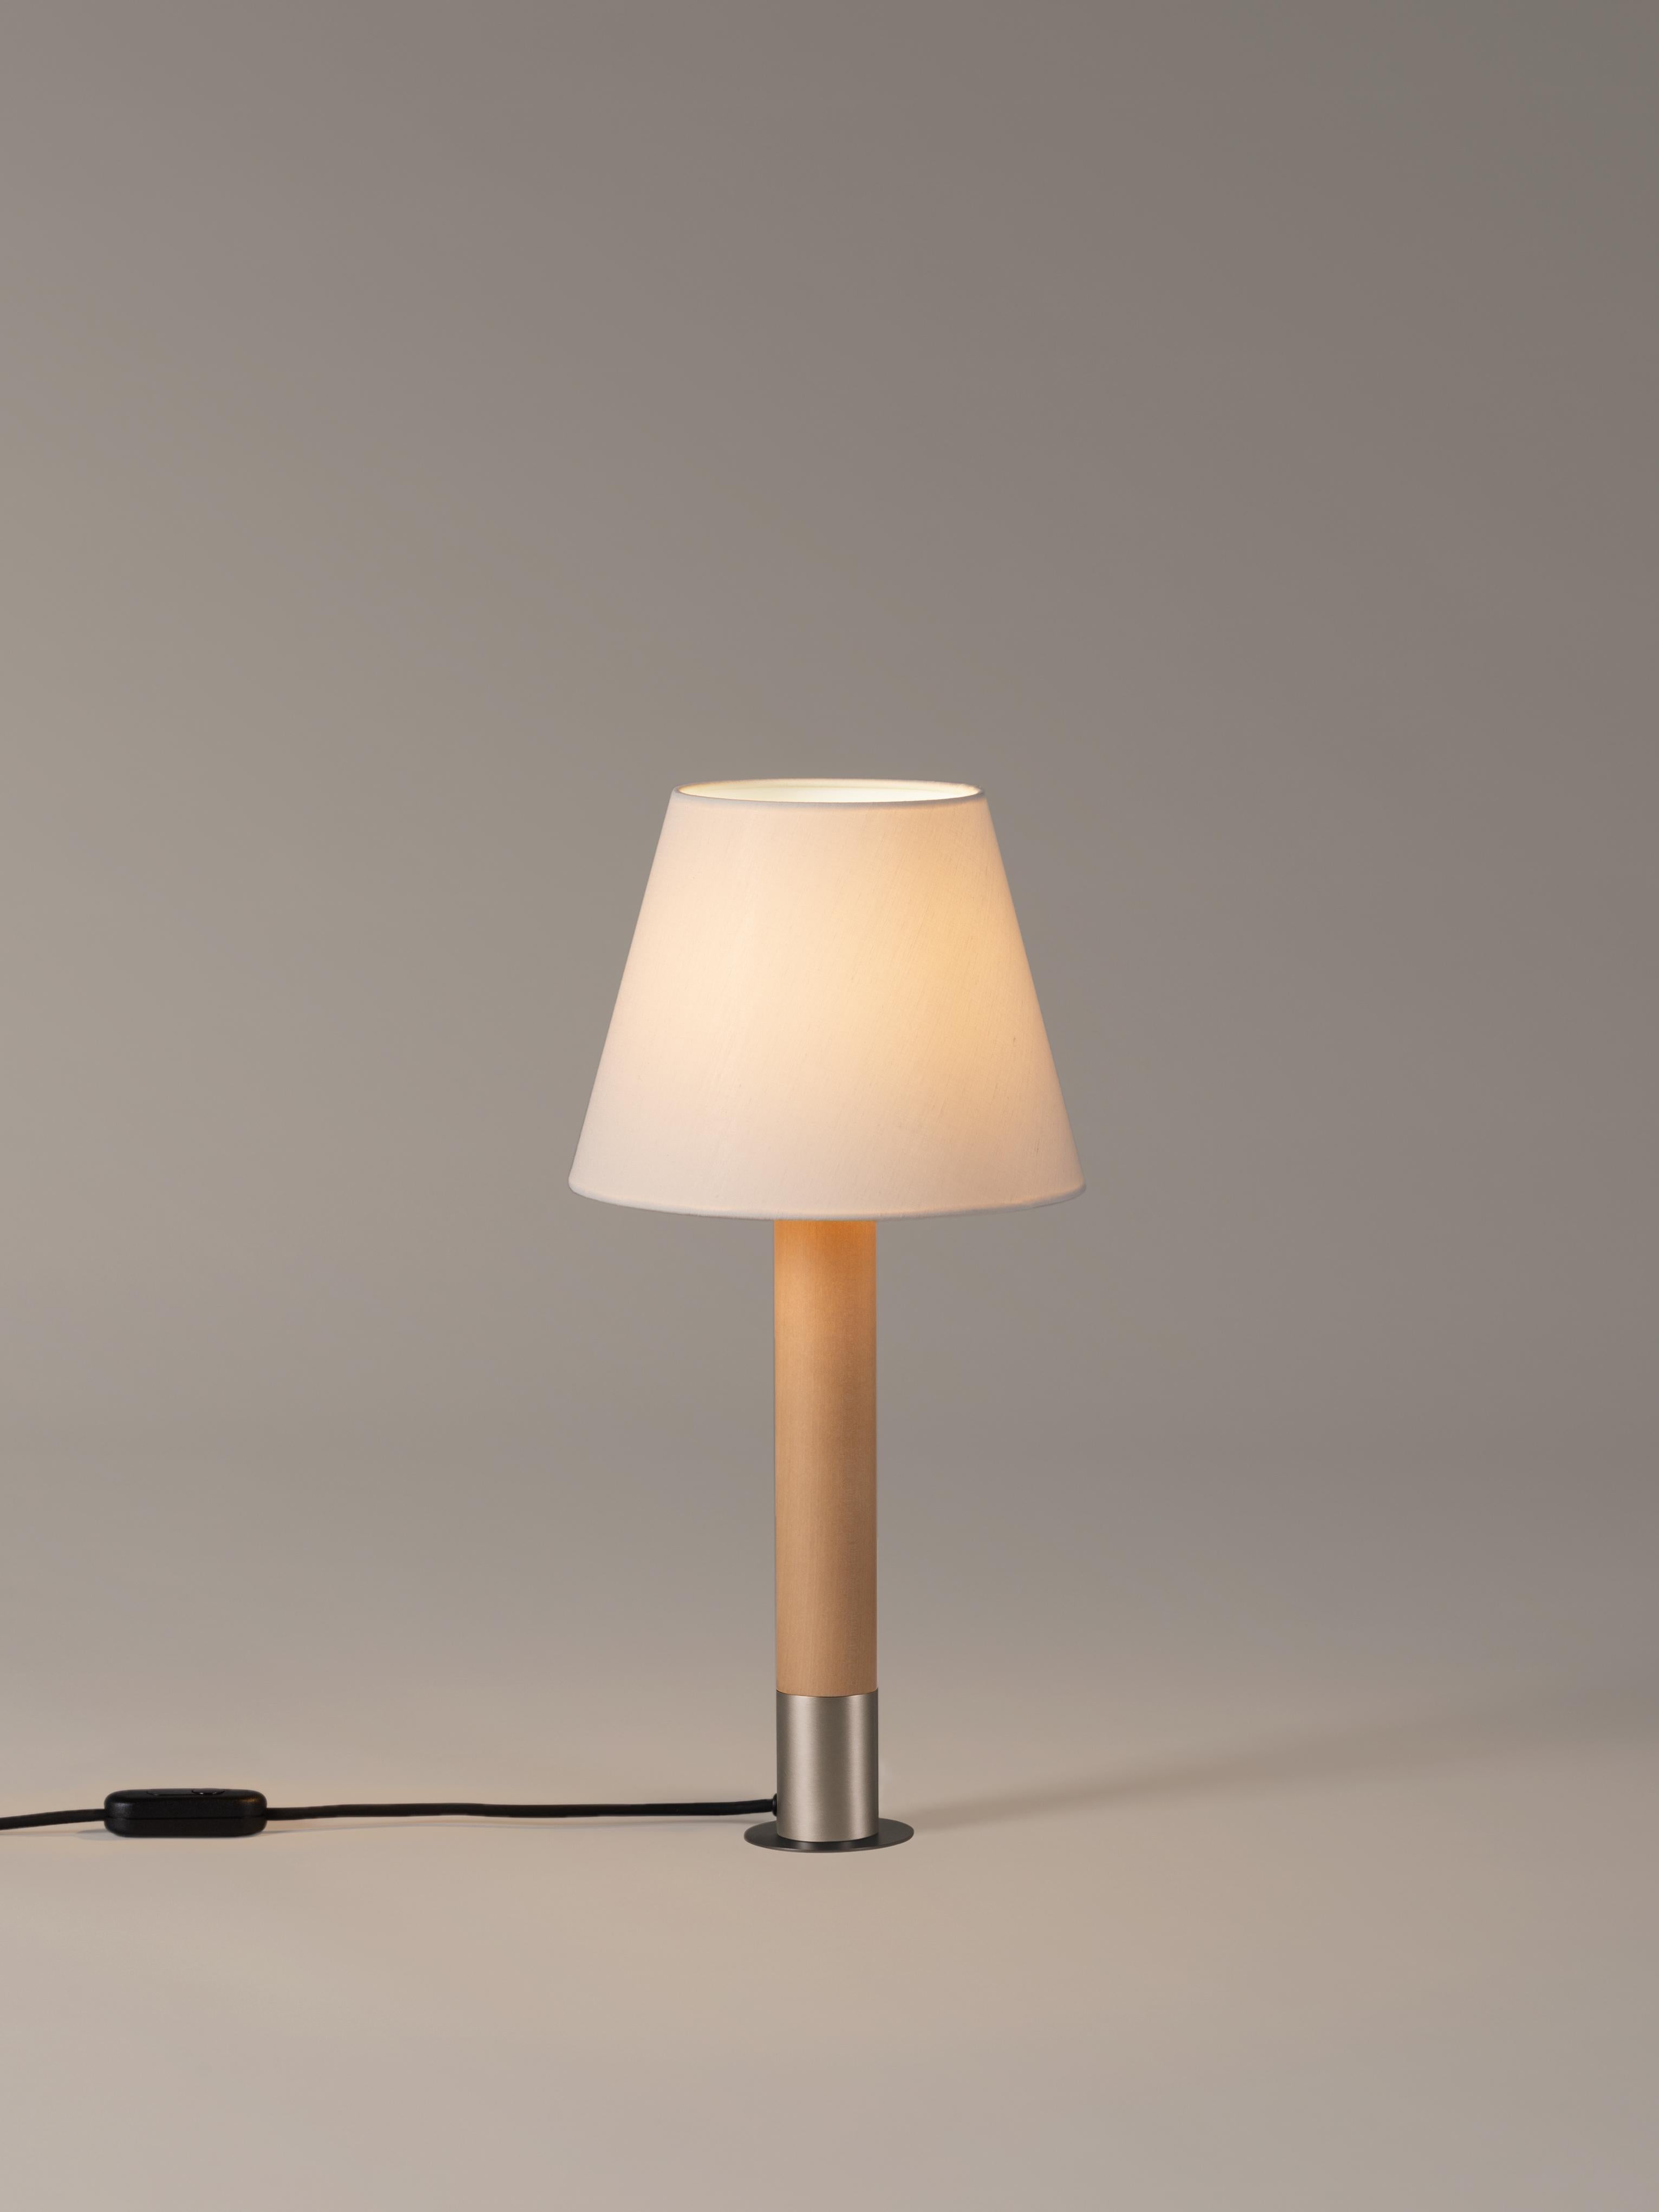 Nickel and white Básica M1 table lamp by Santiago Roqueta, Santa & Cole
Dimensions: D 25 x H 52 cm
Materials: Nickel, birch wood, linen.
Available in other shade colors and with or without the stabilizing disc.
Available in nickel or